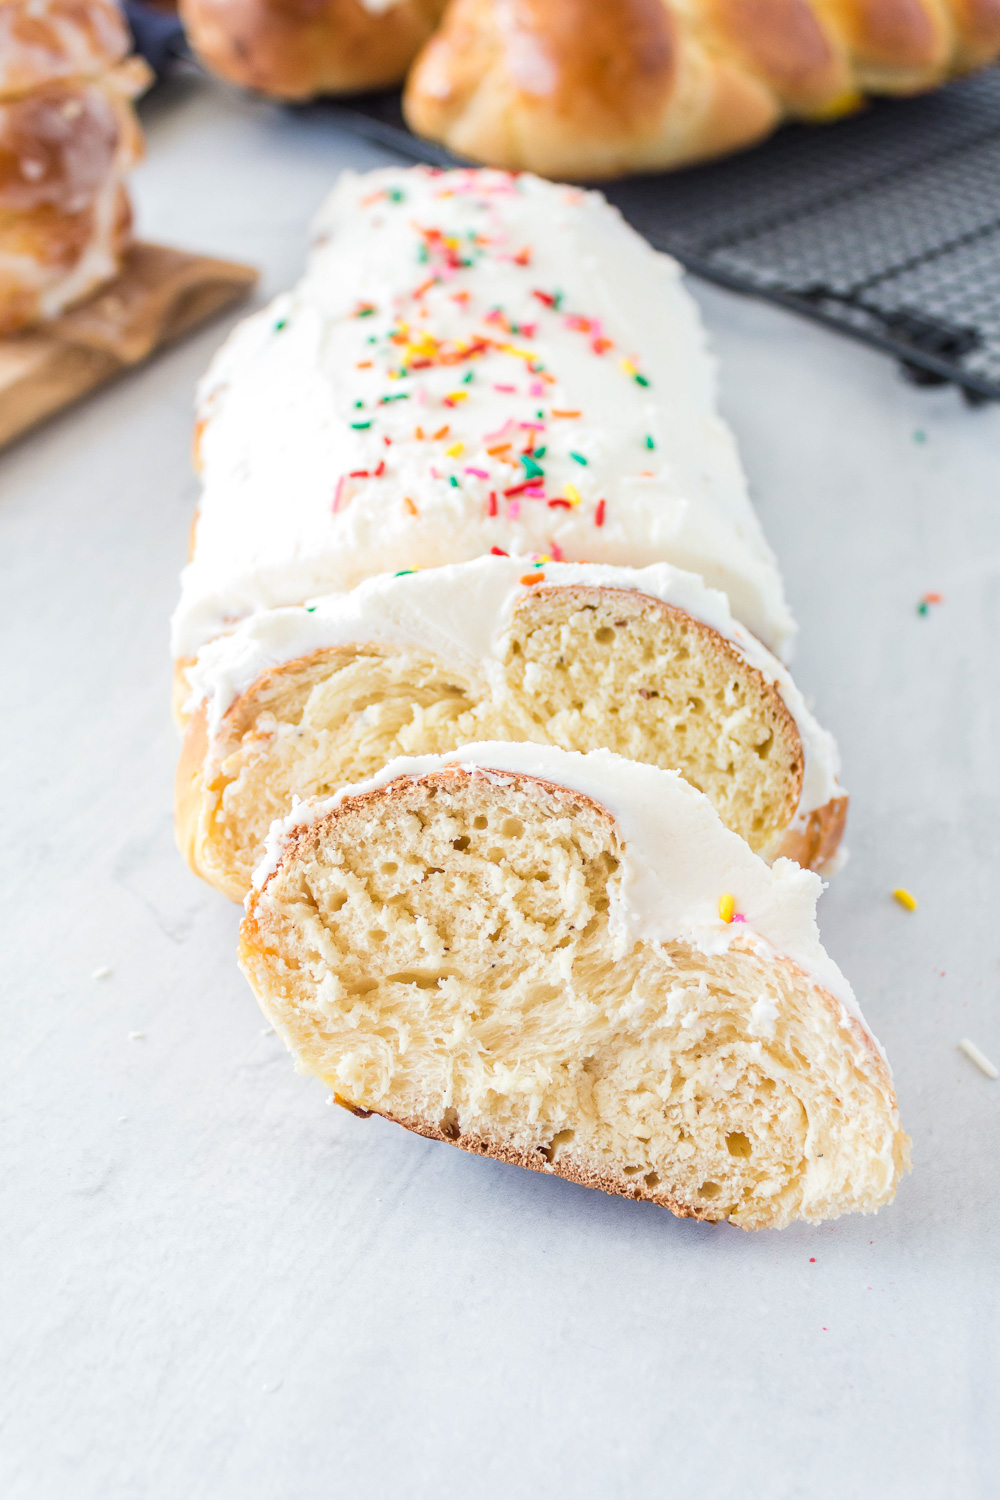 An iced with sprinkles loaf of bread with two pieces cut and laying back on the bread on a white counter.